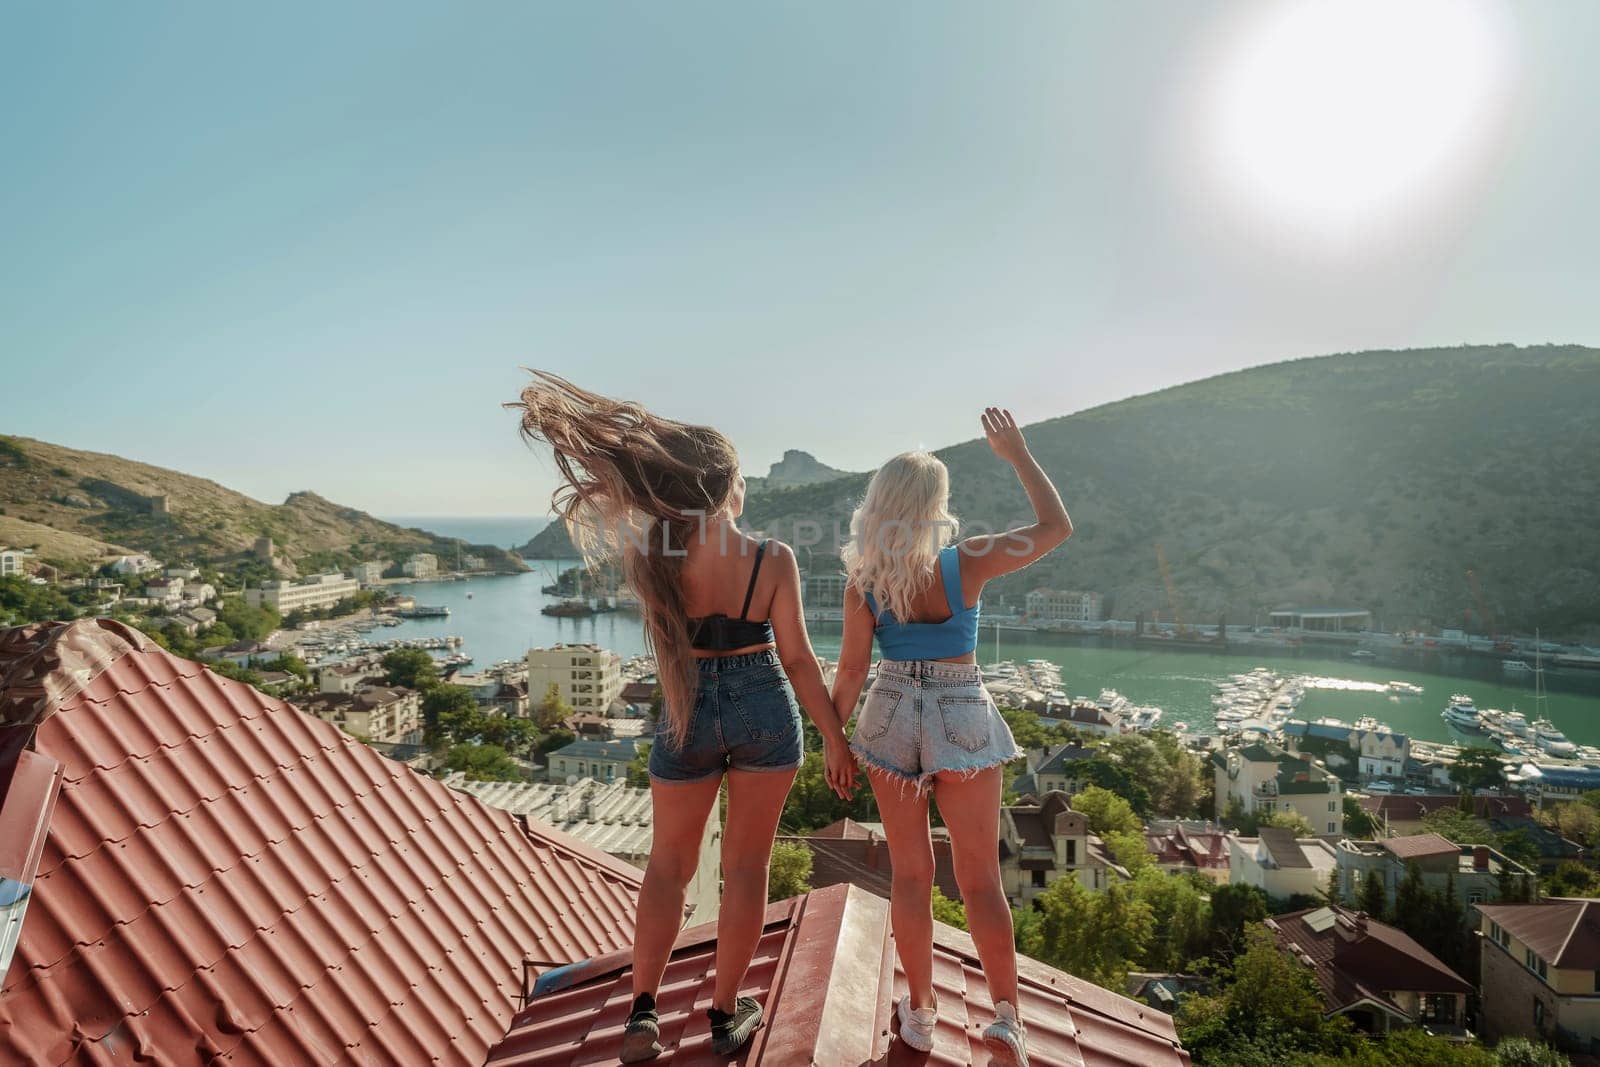 women standing on rooftop, enjoys town view and sea mountains. Peaceful rooftop relaxation. Below her, there is a town with several boats visible in the water. Rooftop vantage point